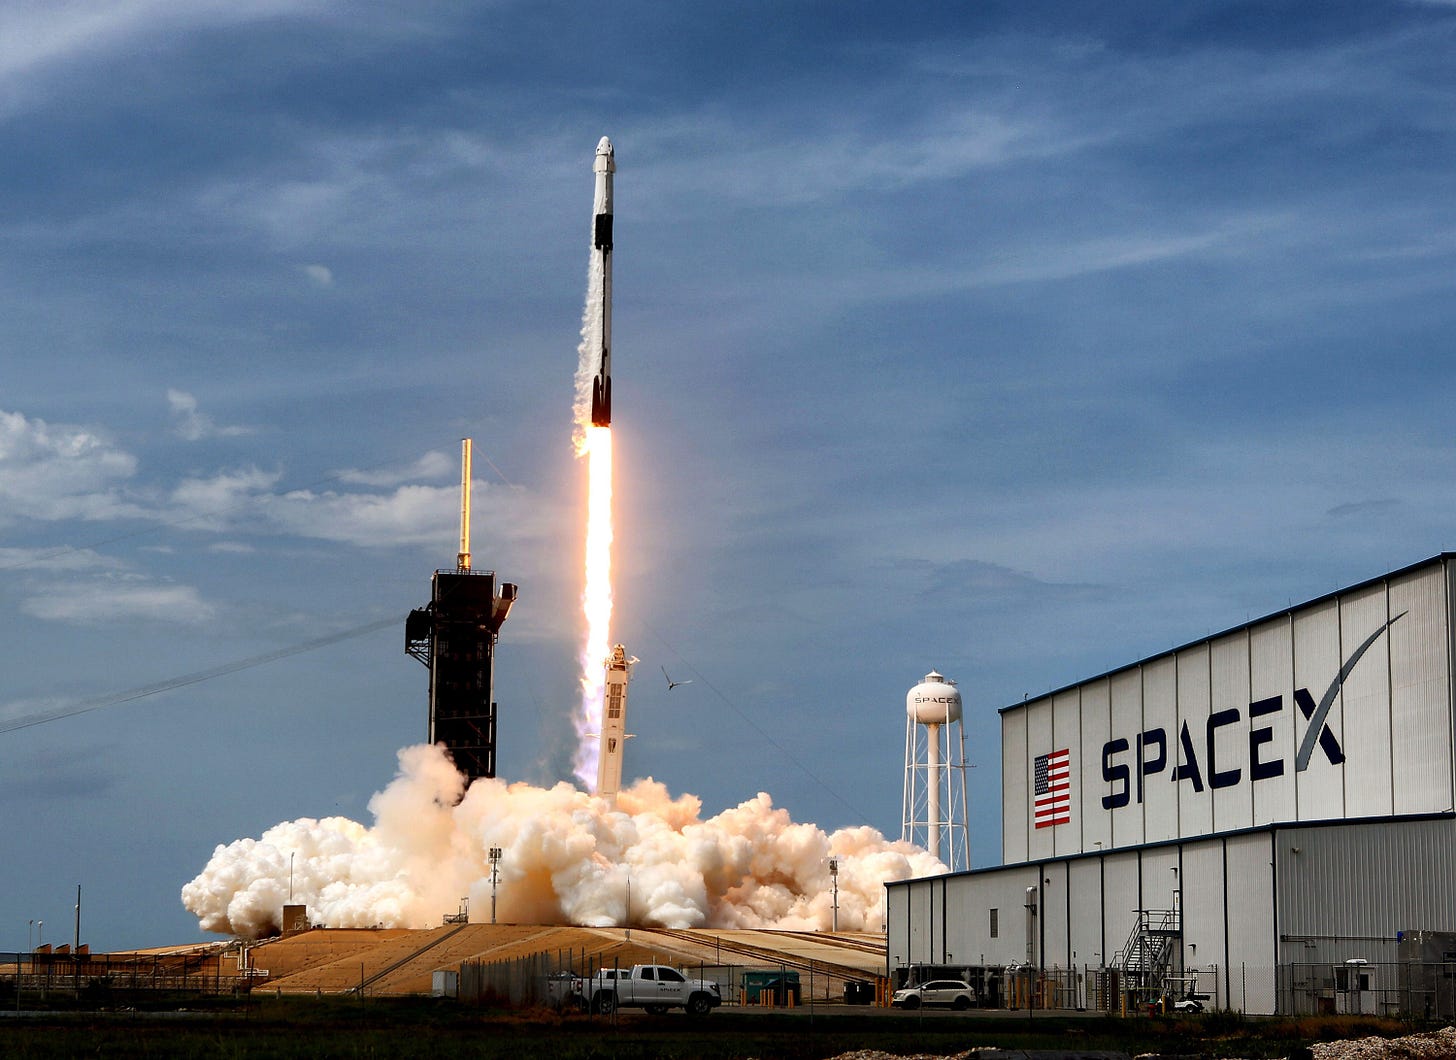 SpaceX has reportedly been developing a network of spy satellites